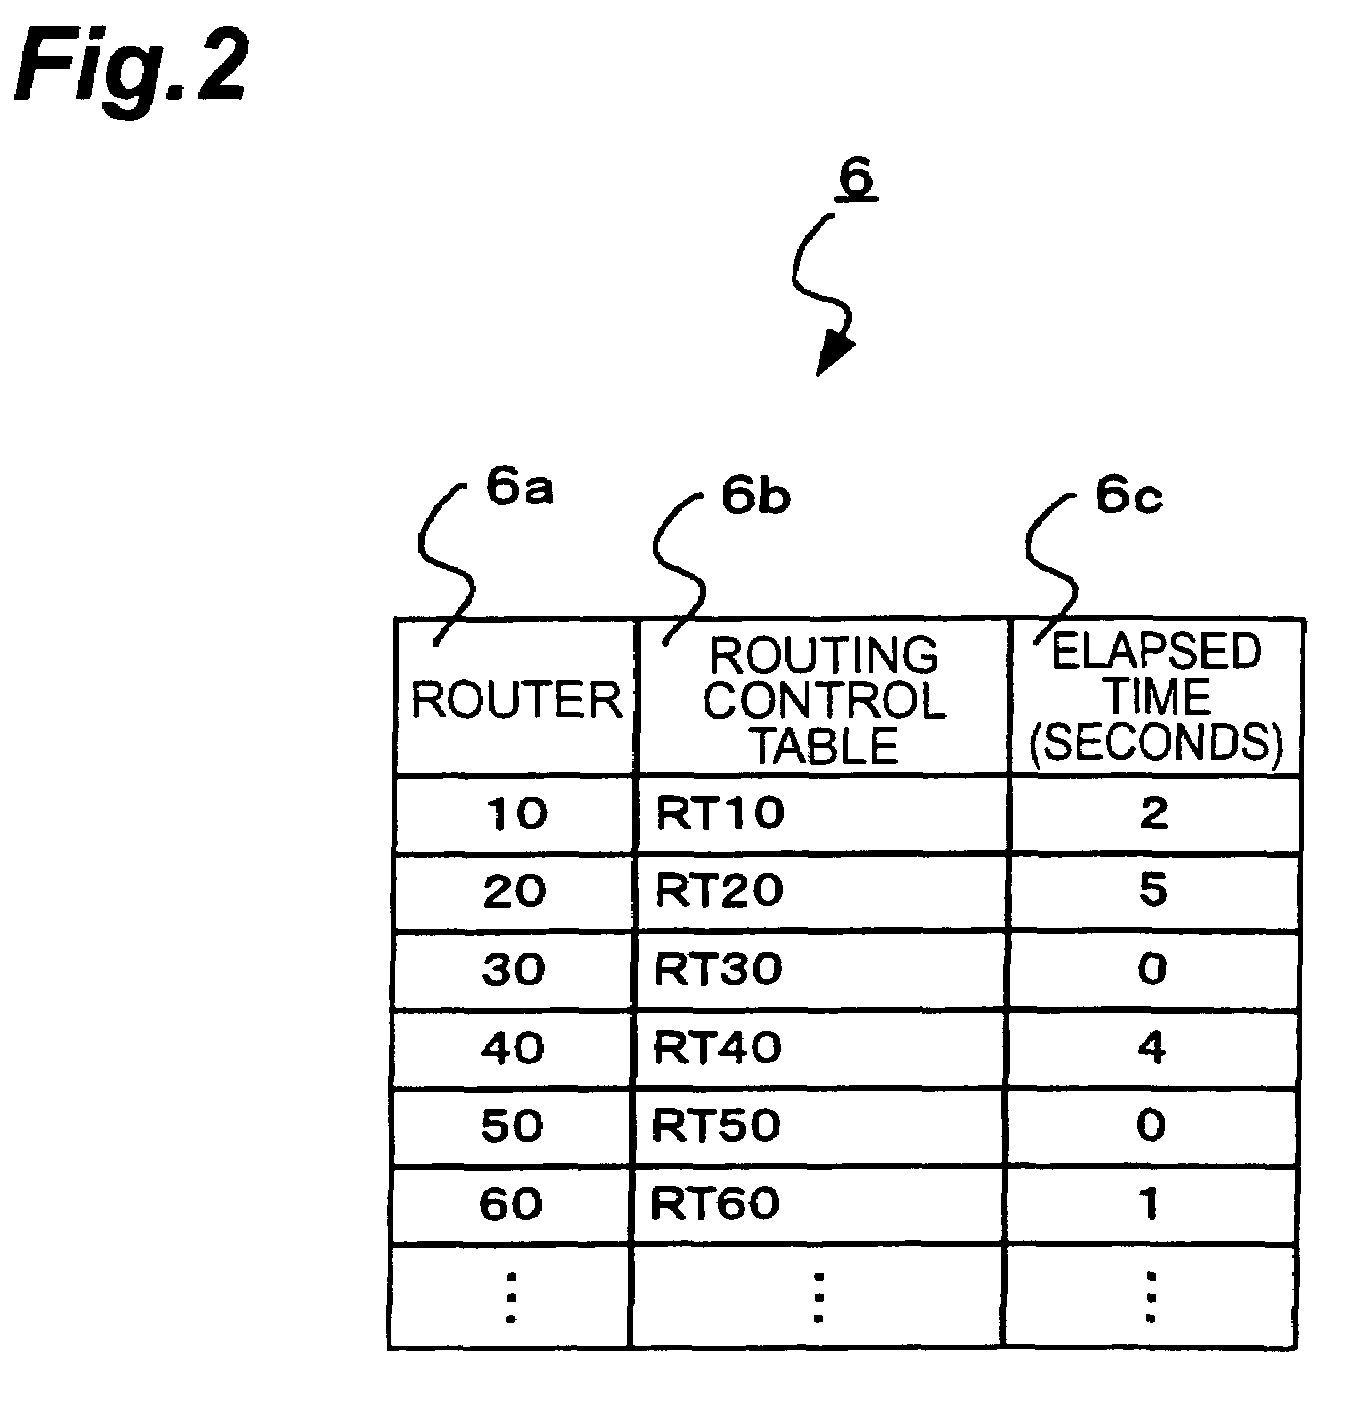 Routing control system, routing control device, and routing control method